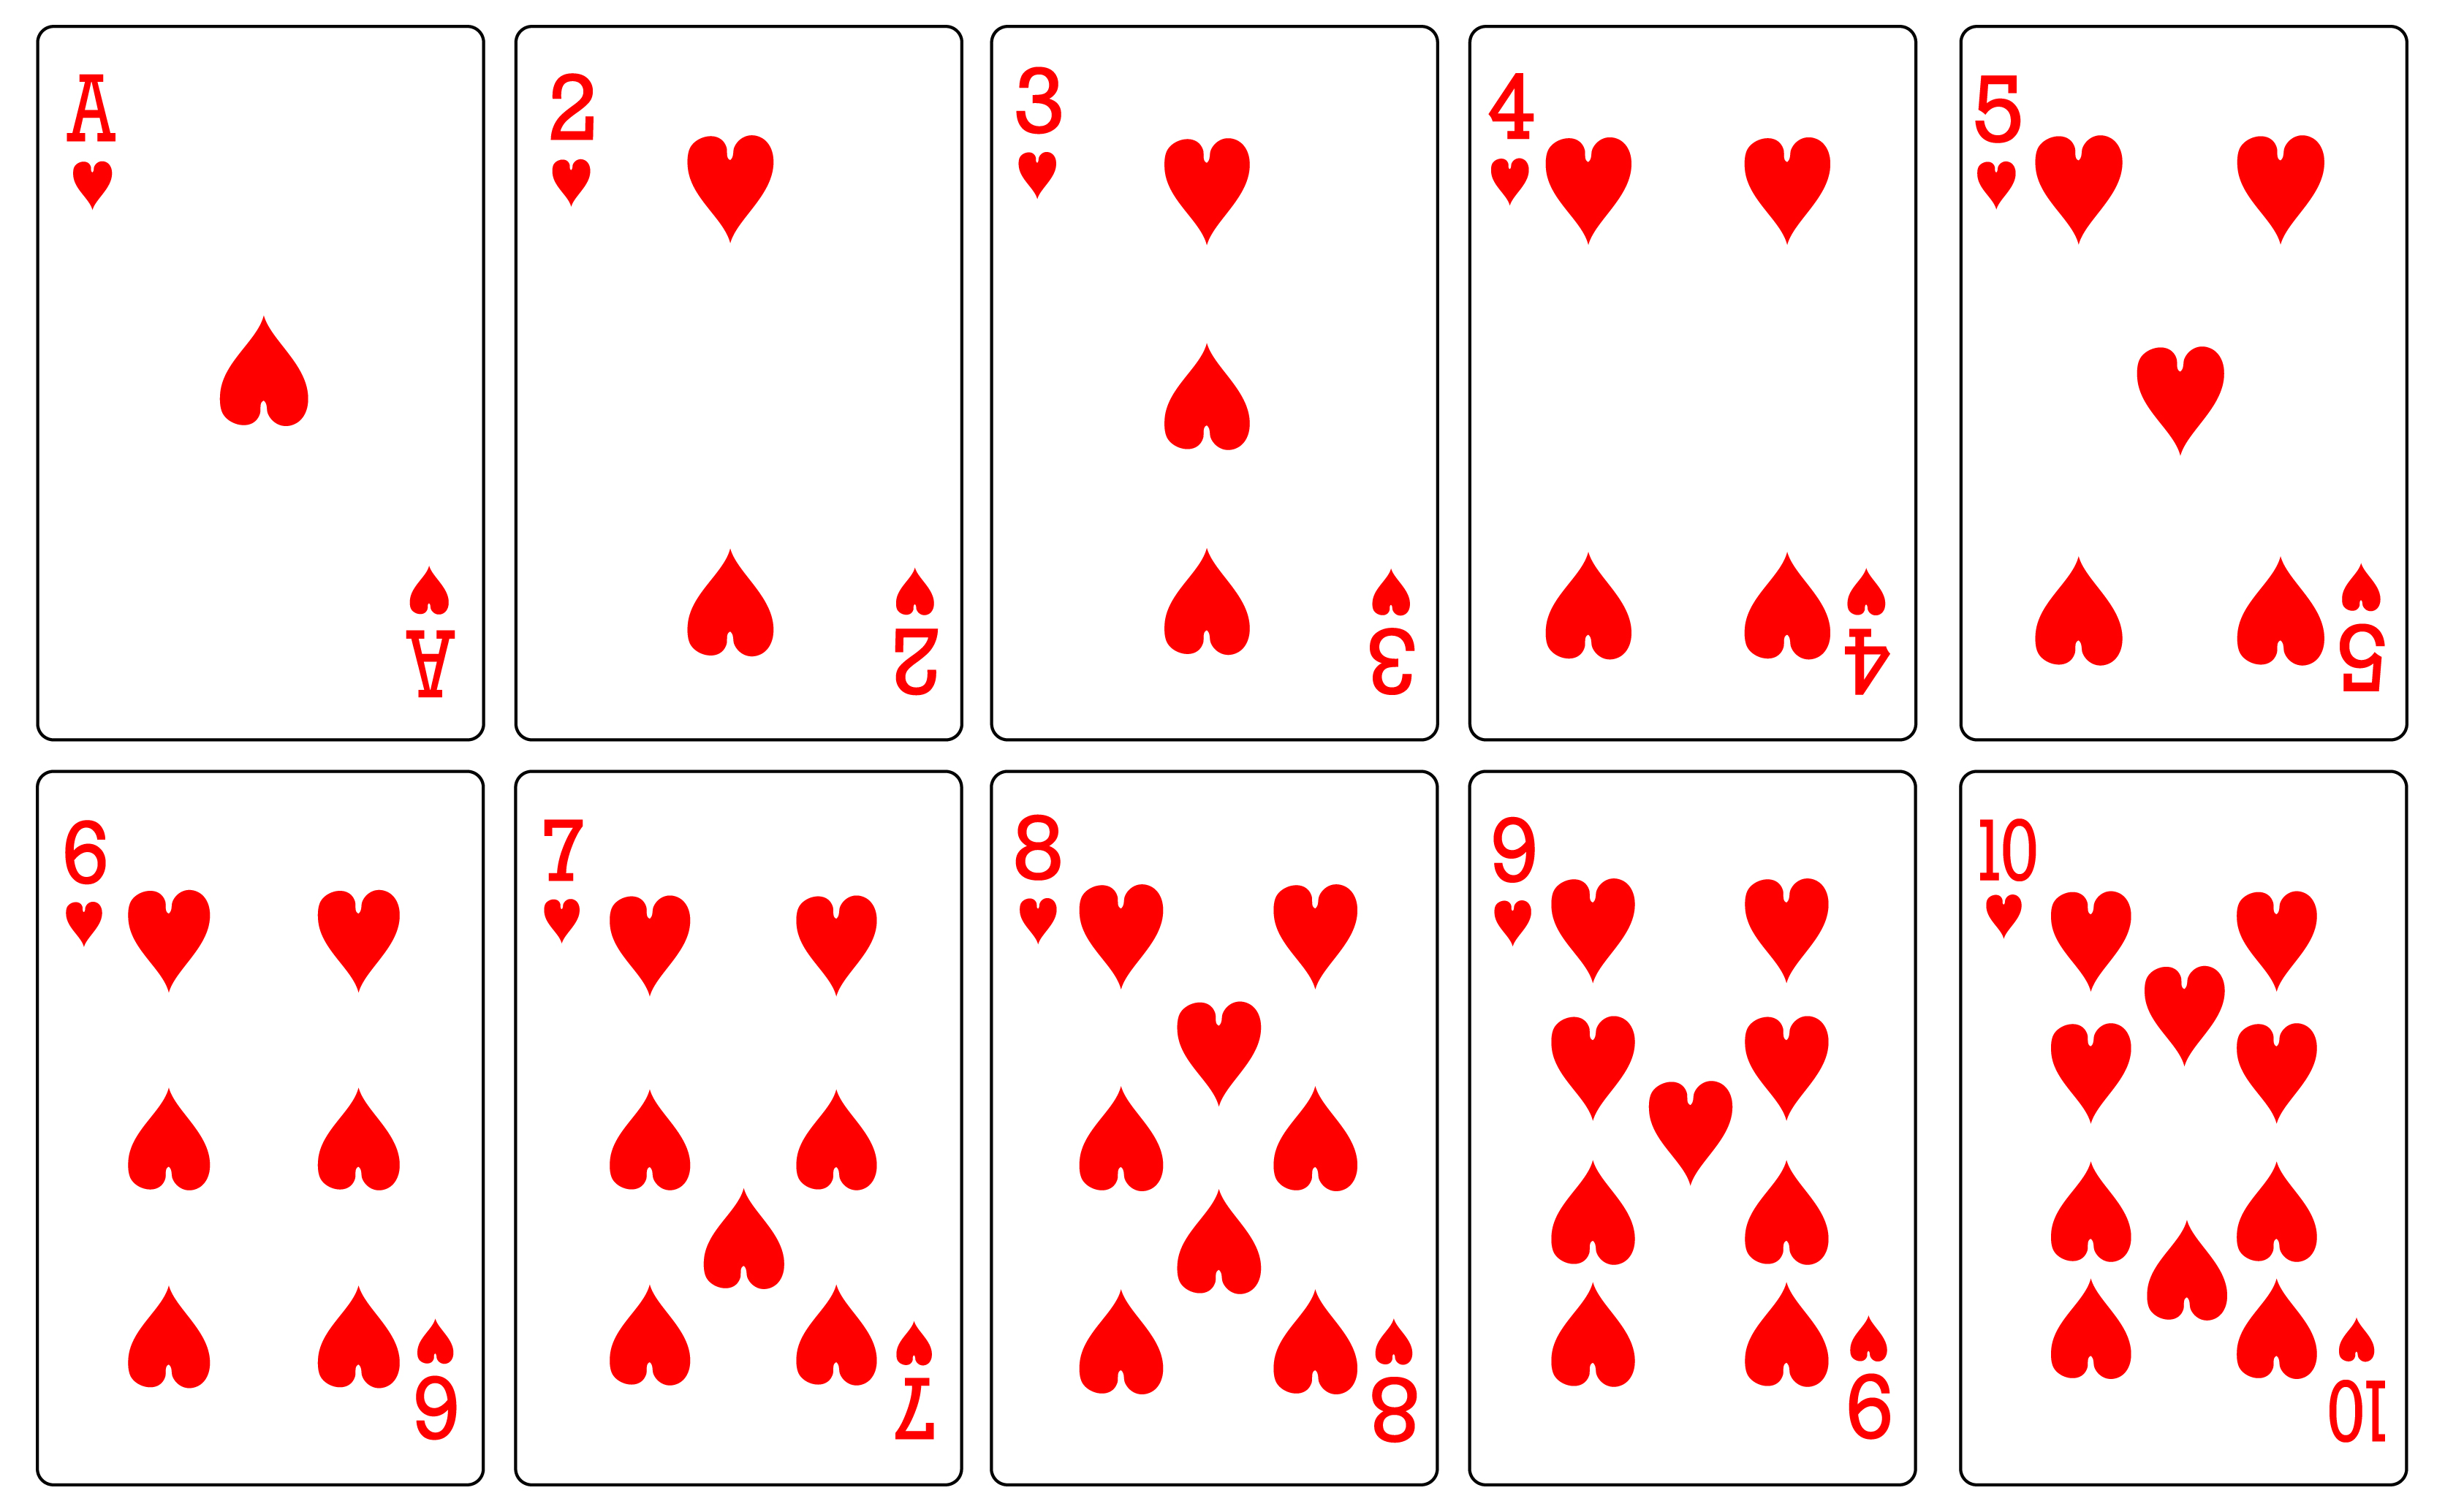 free-playing-cards-download-free-playing-cards-png-images-free